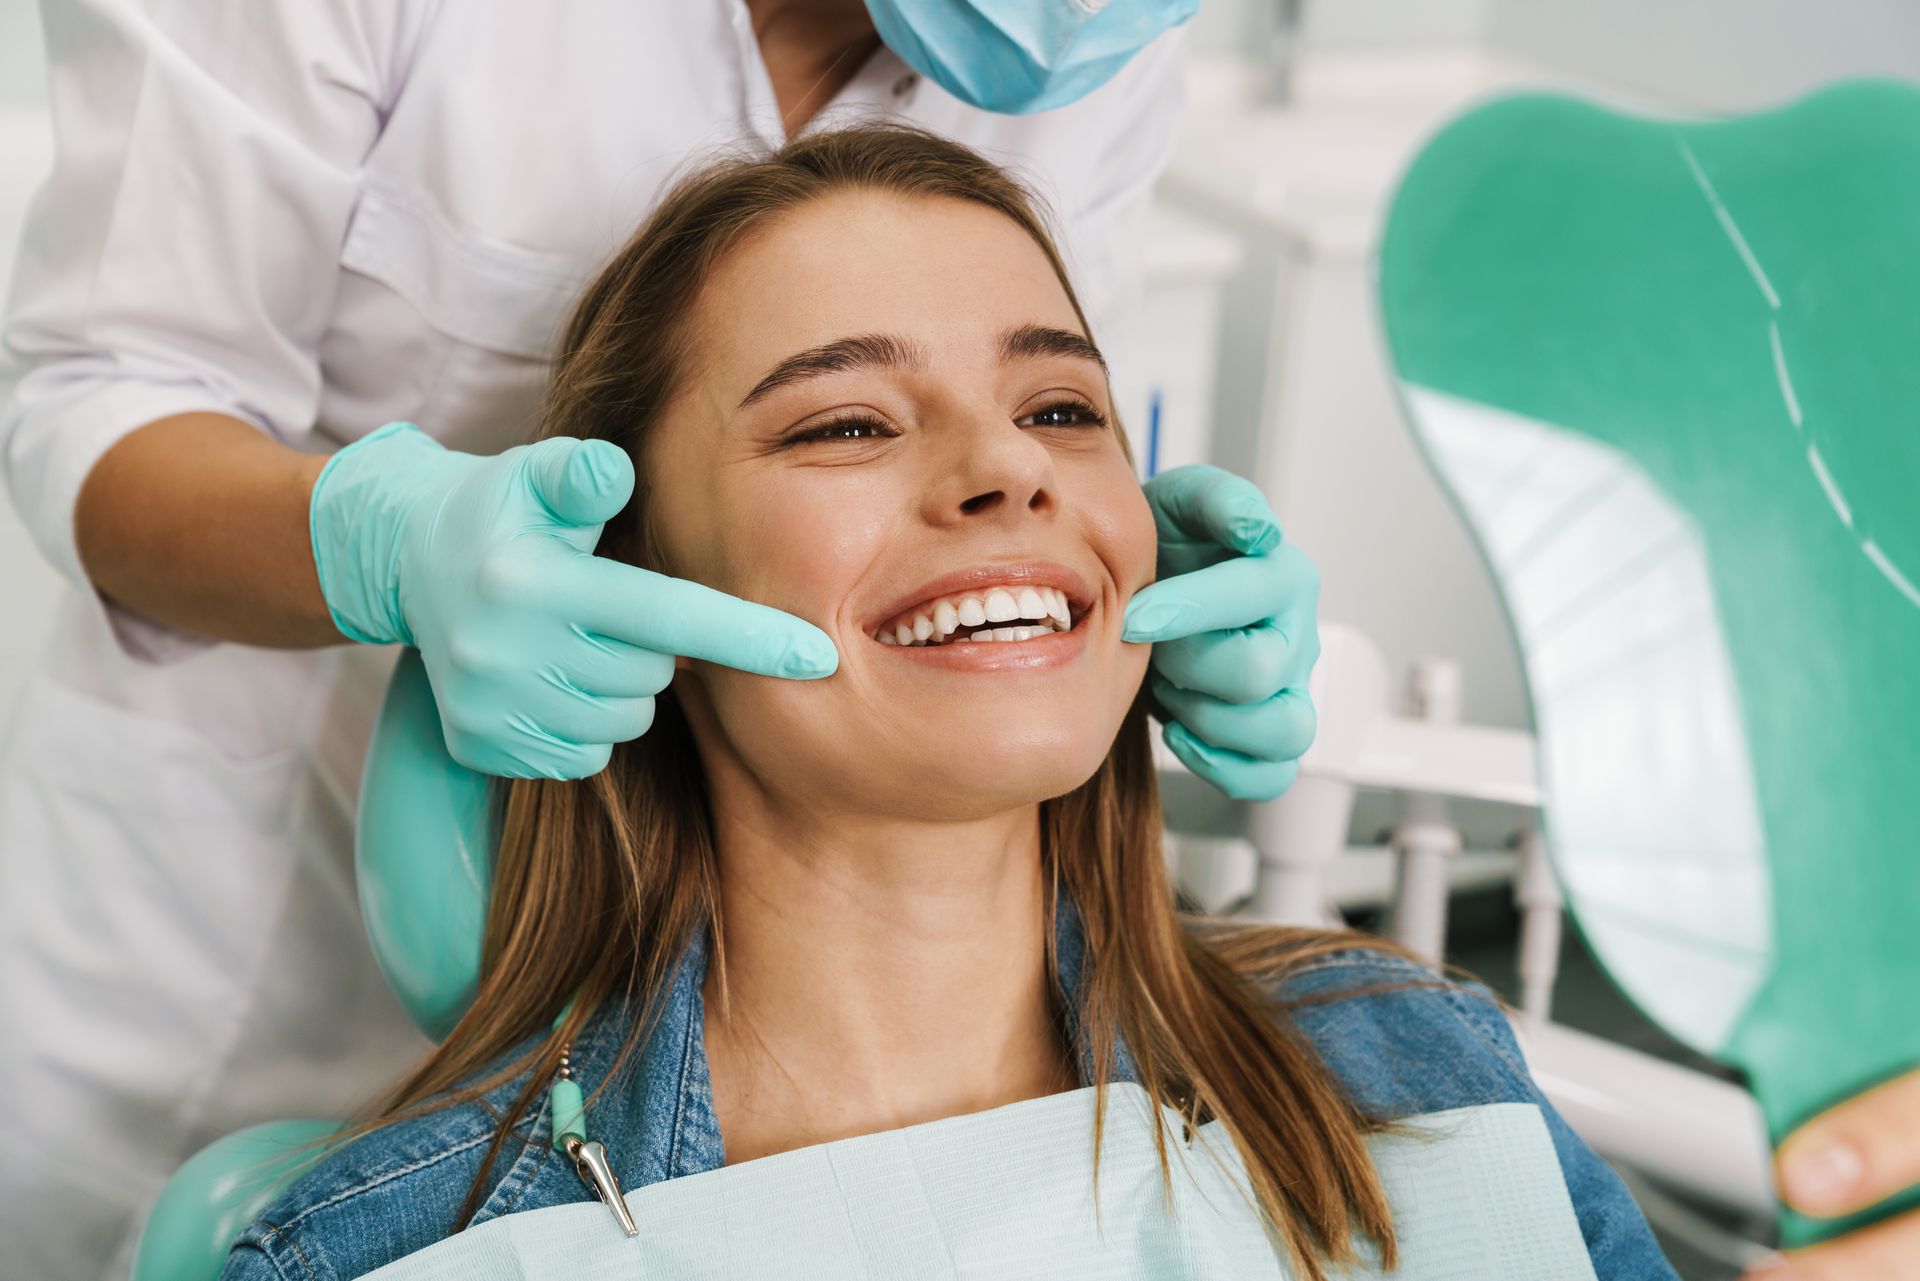 A woman is sitting in a dental chair while a dentist examines her teeth.